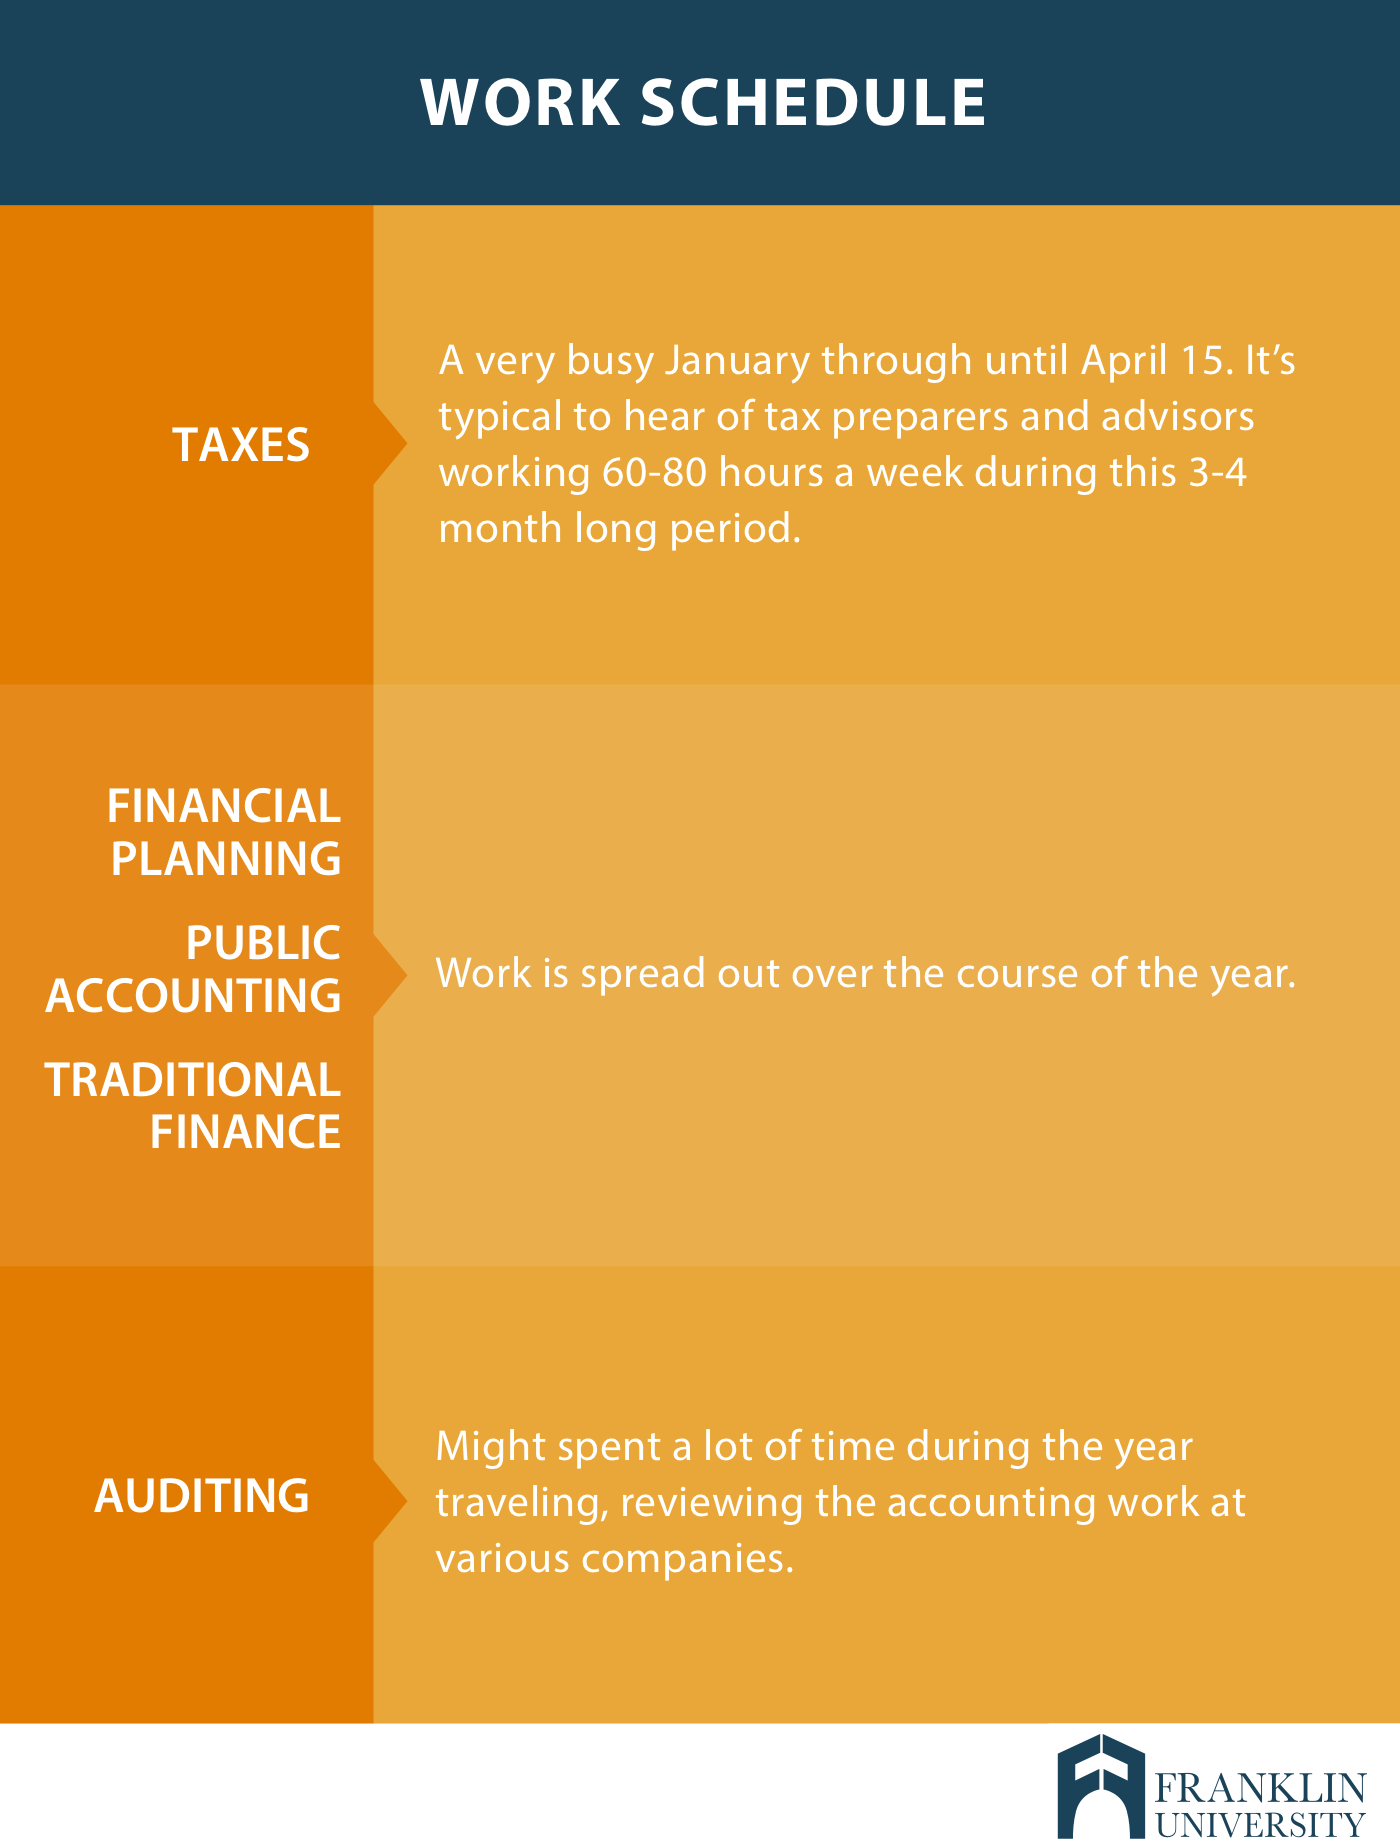 graphic describes the work schedule of a finance or accounting professional